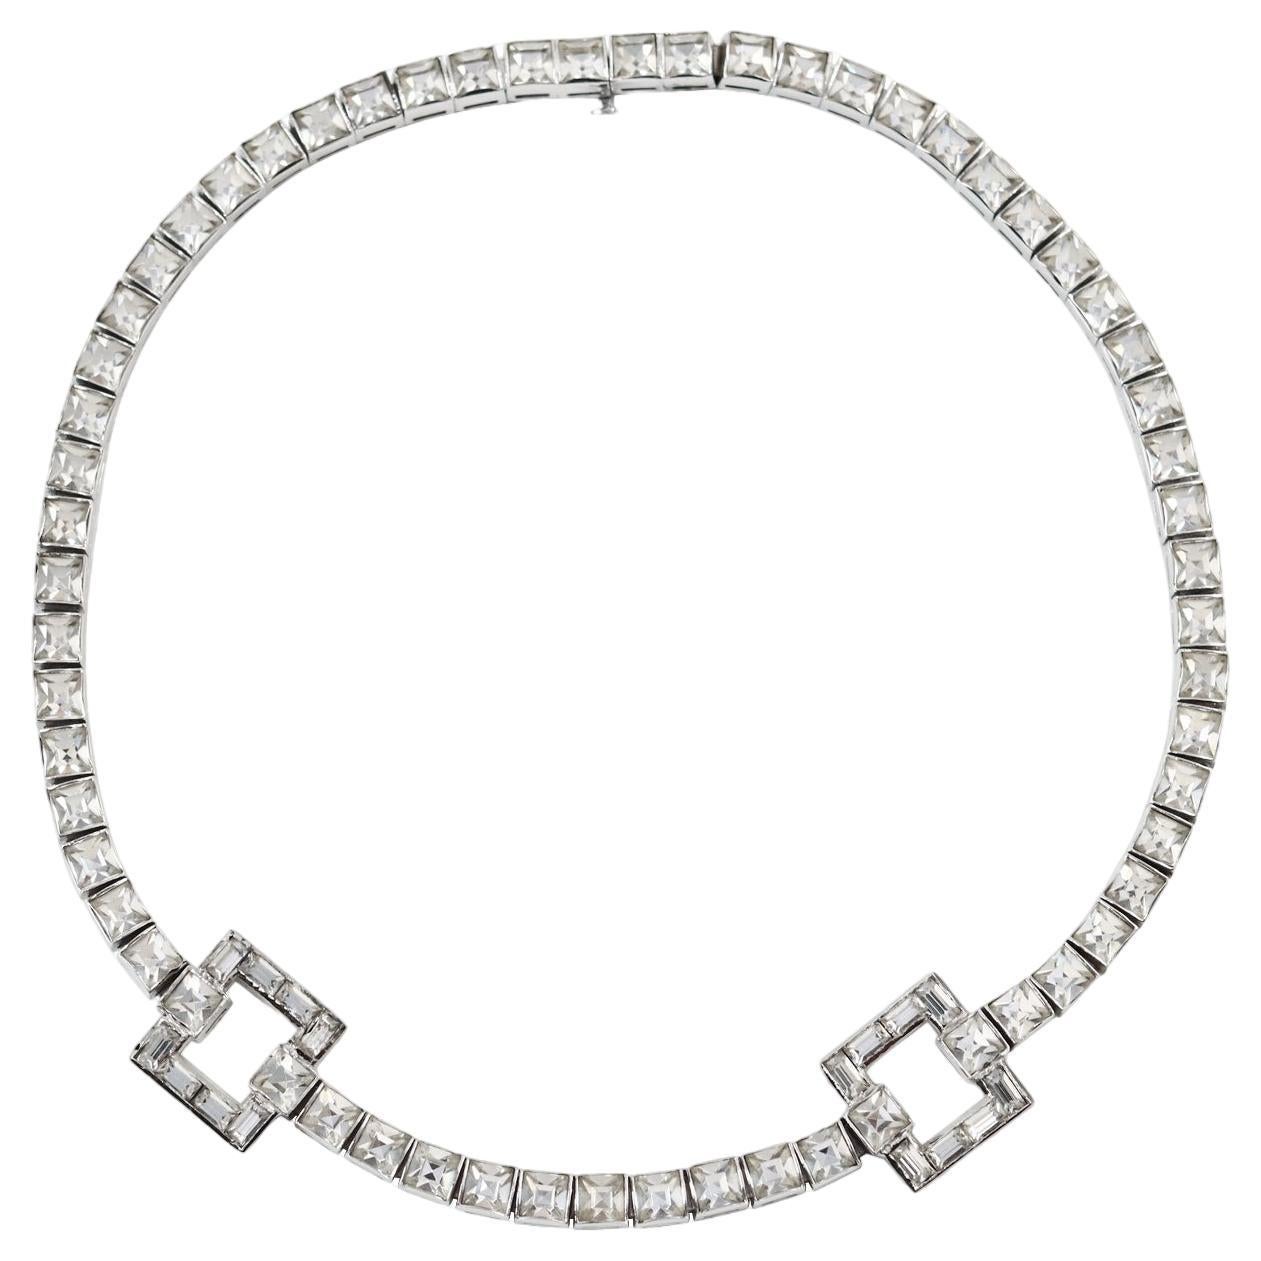 Vintage Dorsons Sterling Channel Set Square Choker Circa 1960s.  This looks like a very expensive classic necklace.  It is  channel set and wow does it deliver. In great shape.  You need nothing else.  

Many times at Barneys I sold these pieces to